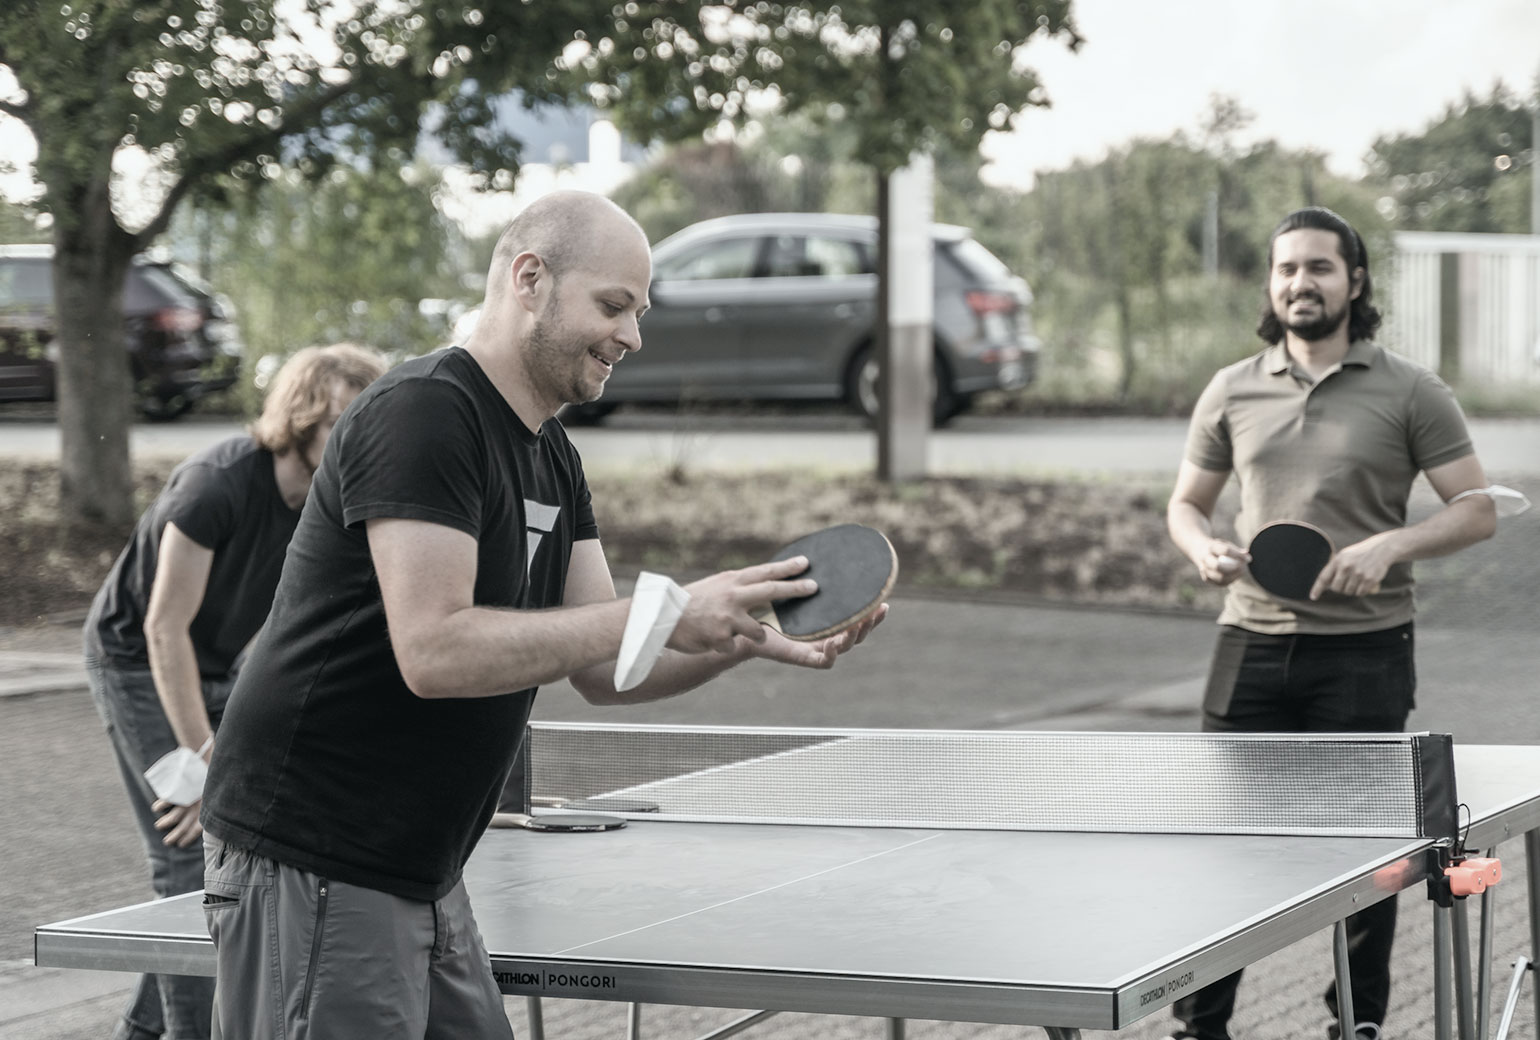 wico-table-tennis-1